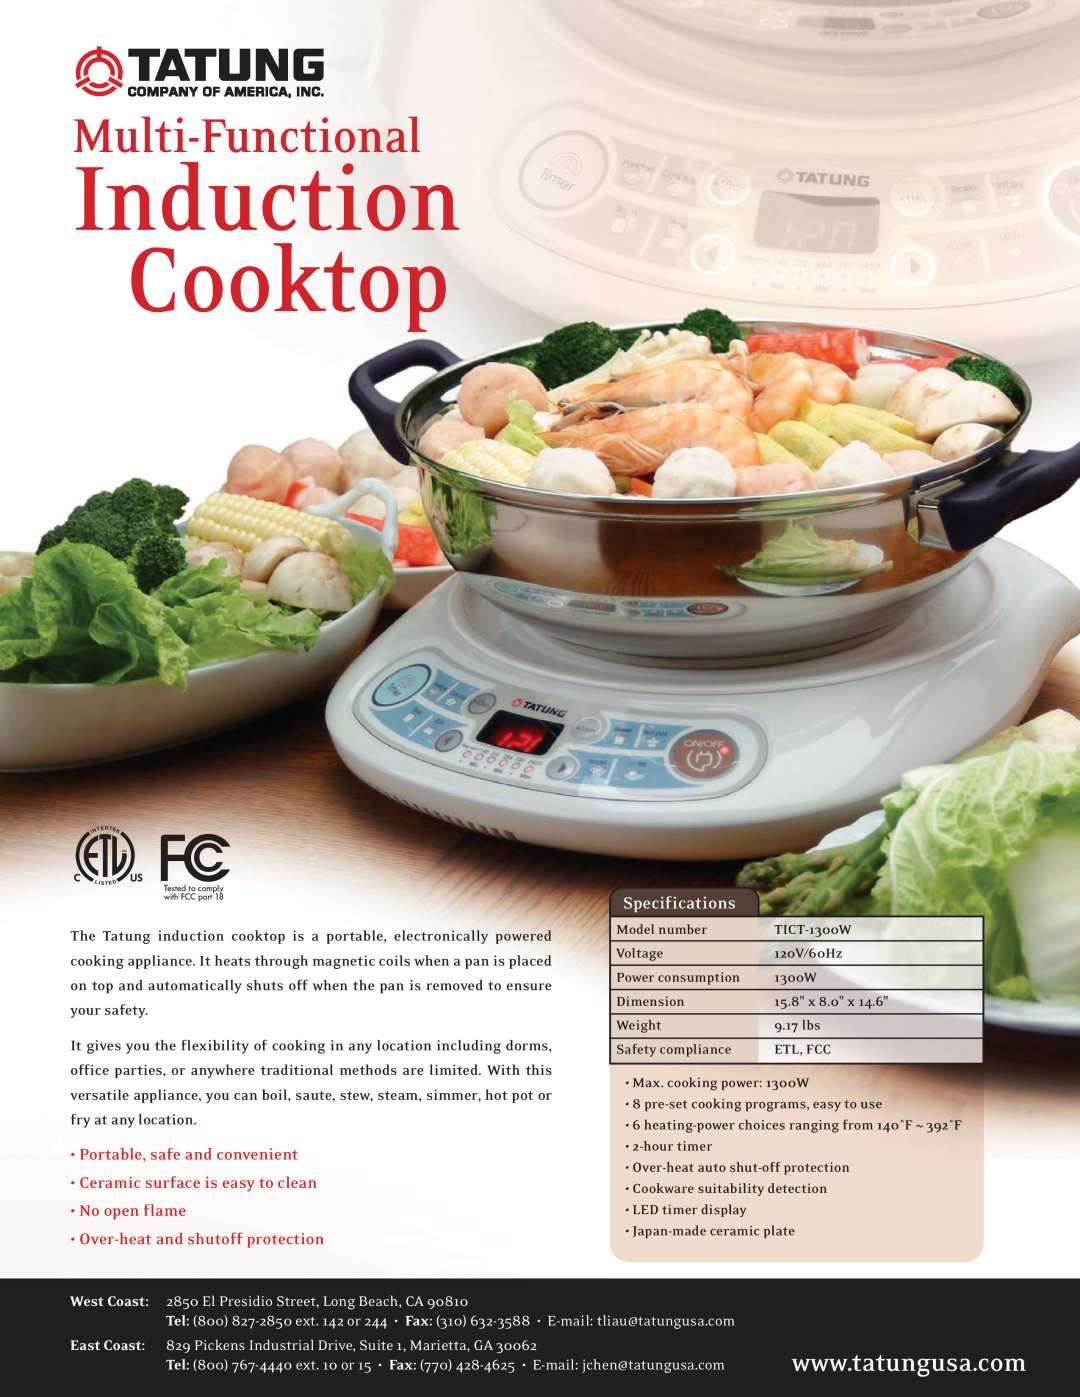 Tatung TICT-1300W specifications Induction Cooktop, Multi-Functional, Specifications, Portable, safe and convenient 